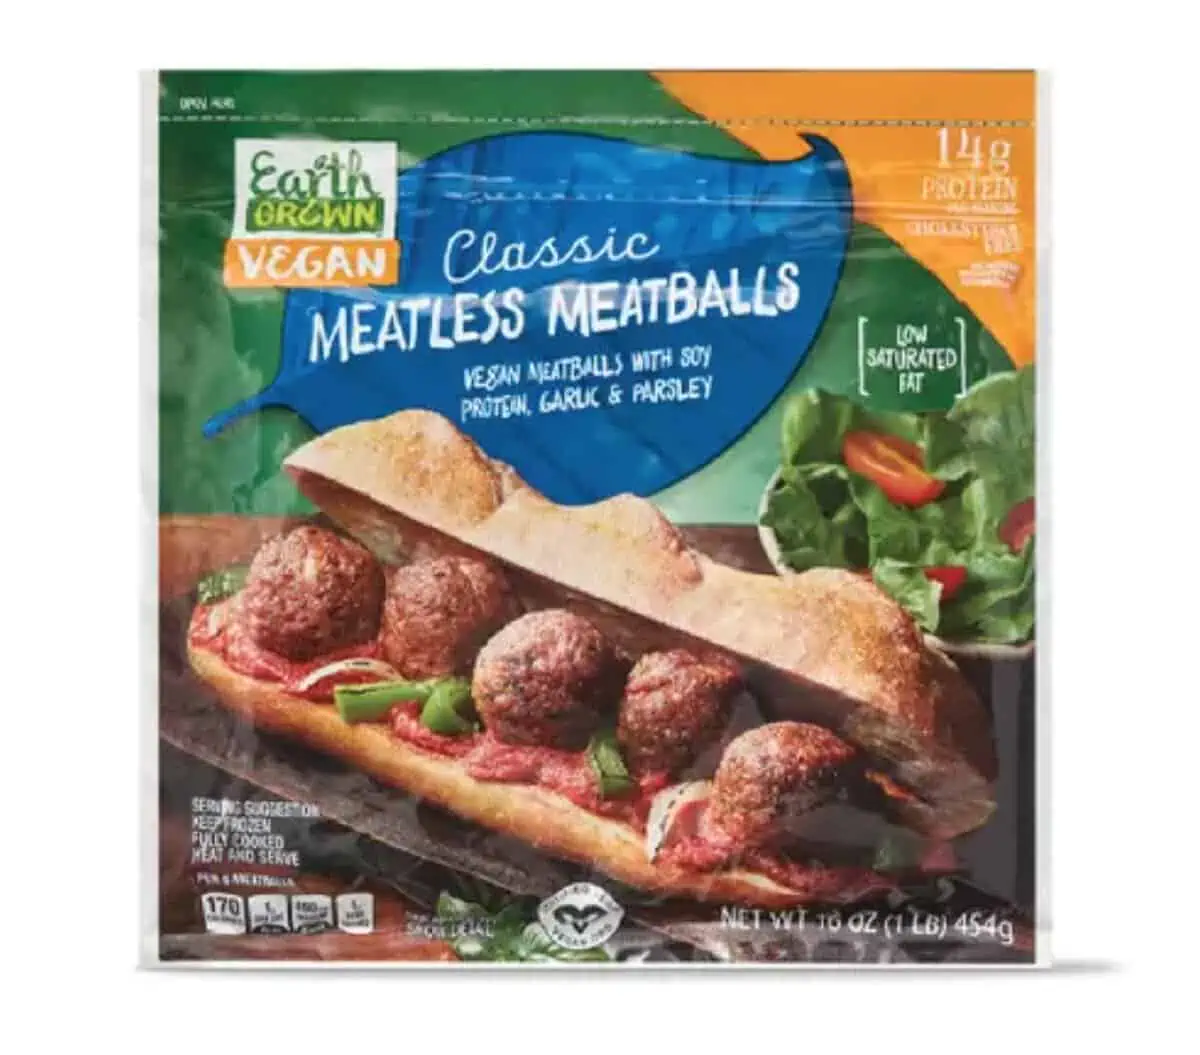 A green package of Aldi's Earth Grown Meatless Meatballs with a photo of a meatball sub with 5 meatballs and sauce on a white background.